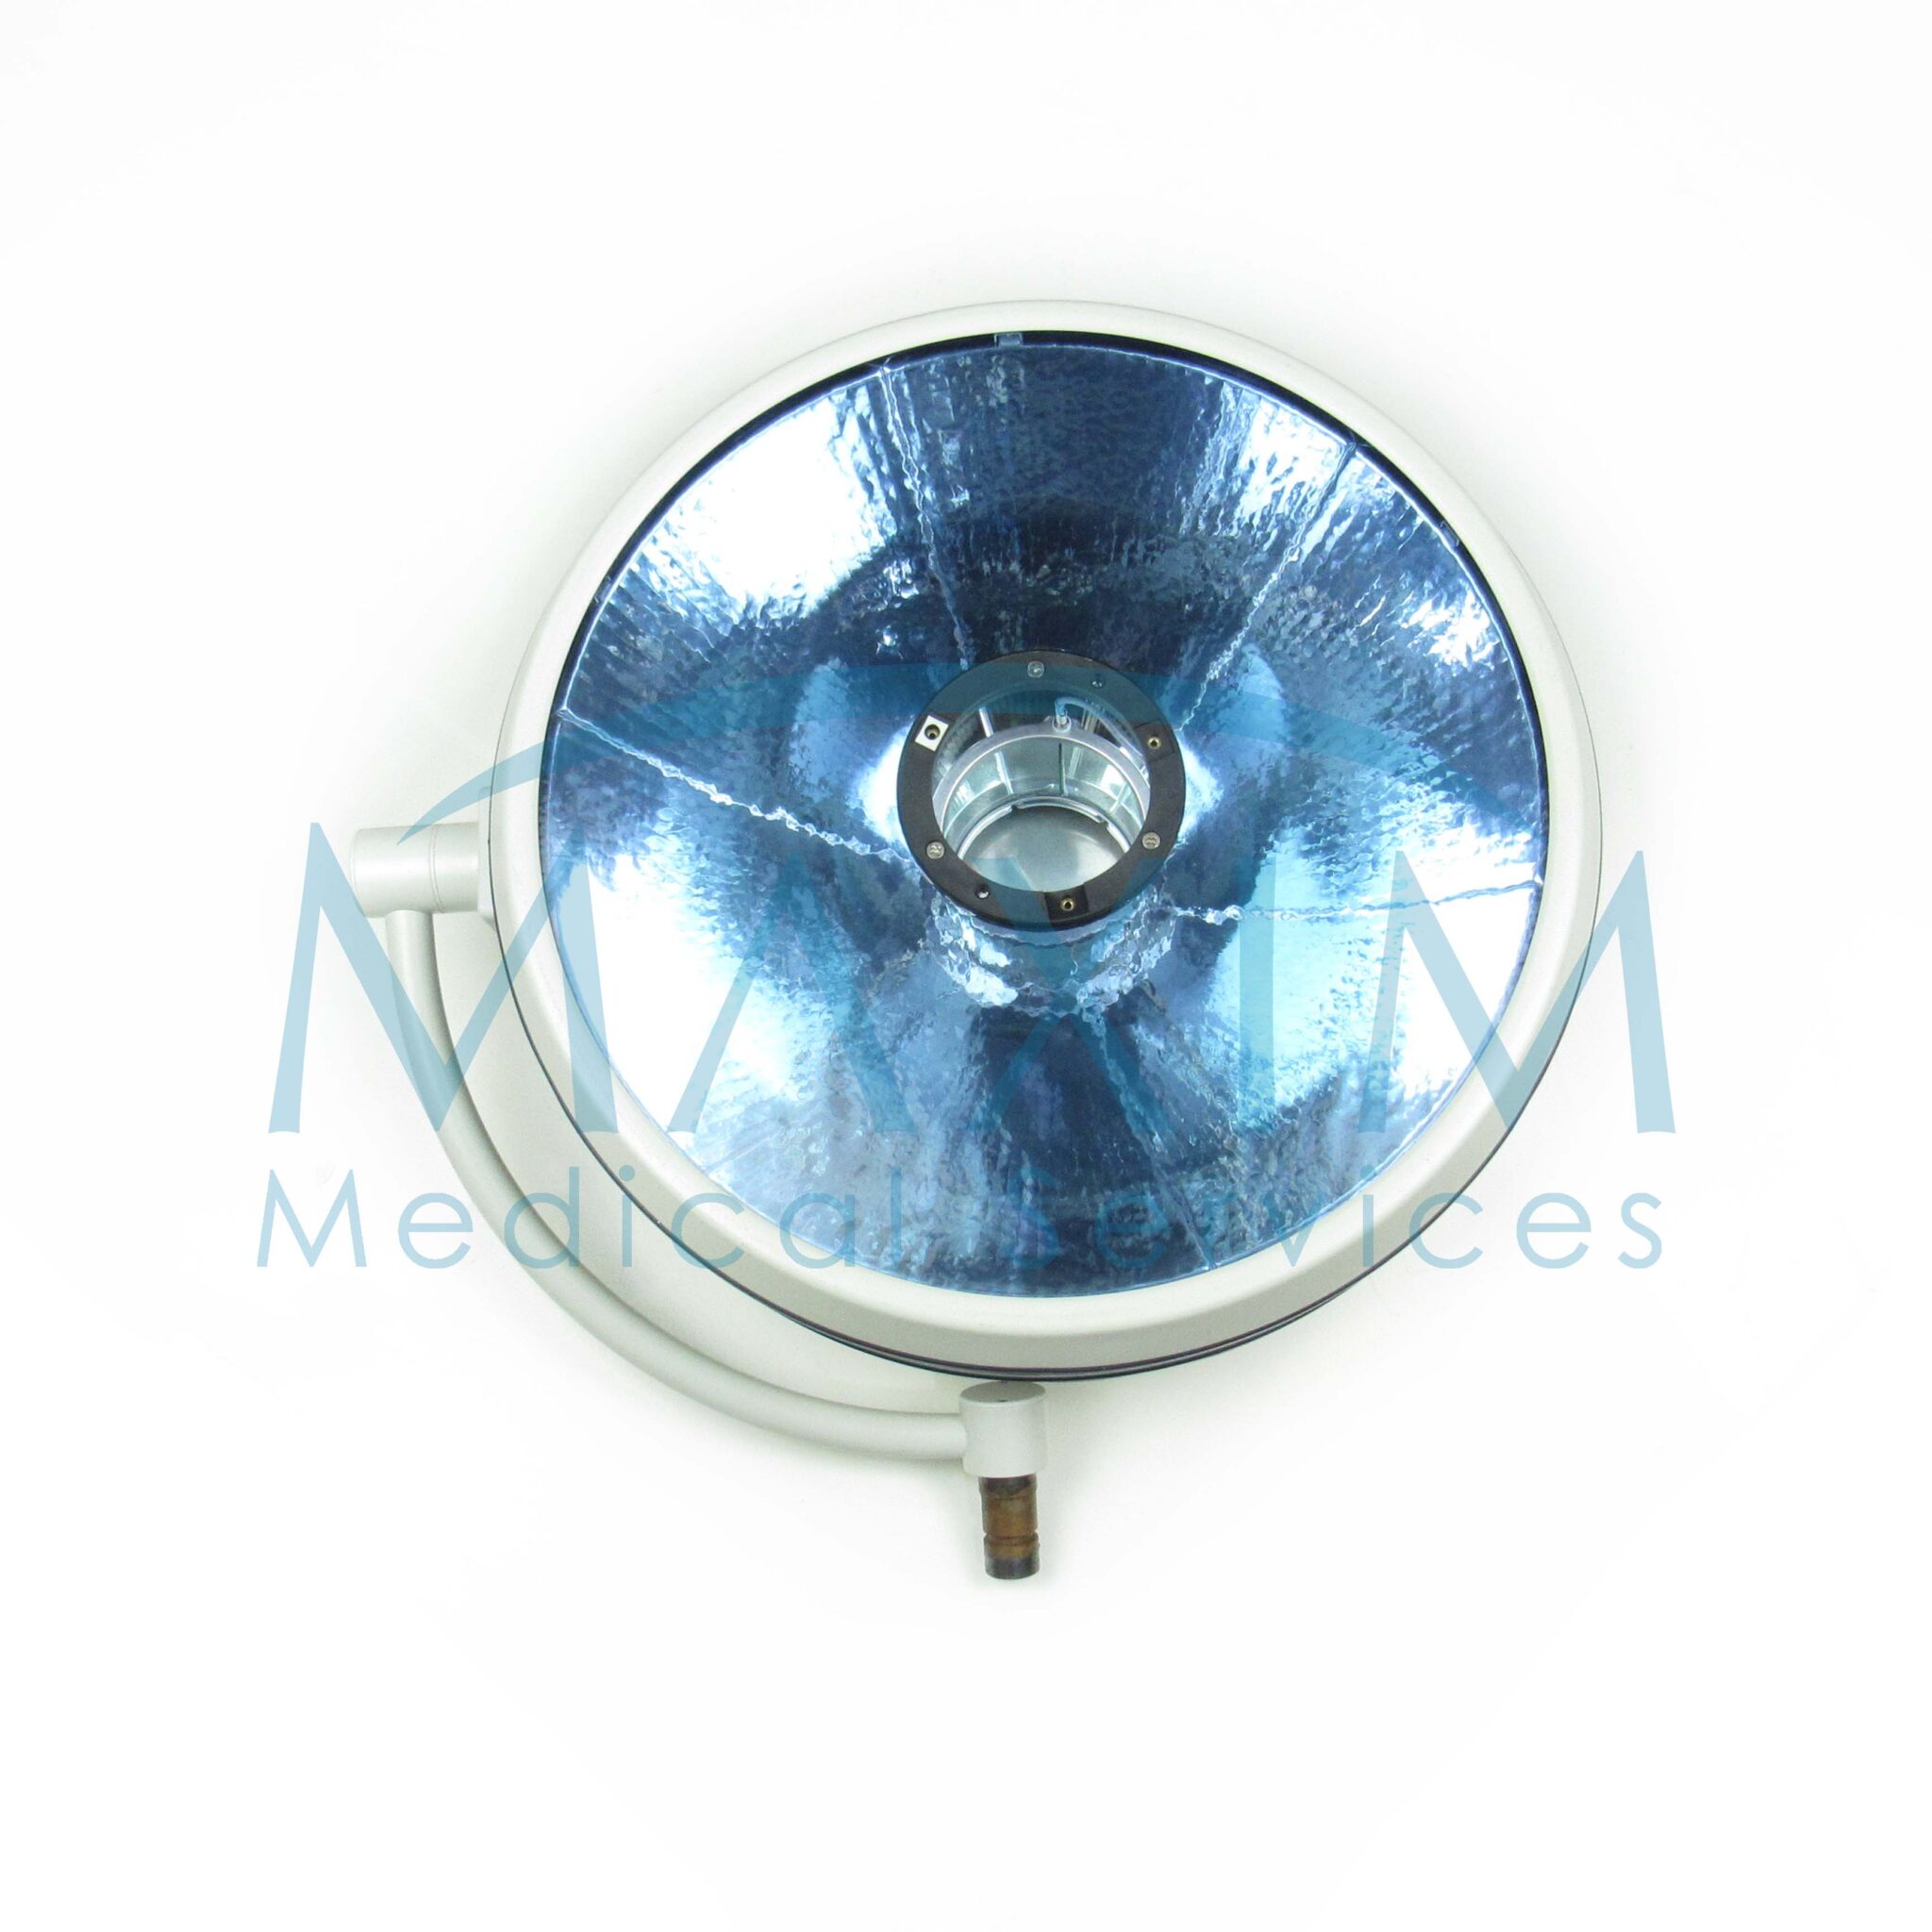 Berchtold Chromophare C571 3-Pole Low-Ceiling Light Head